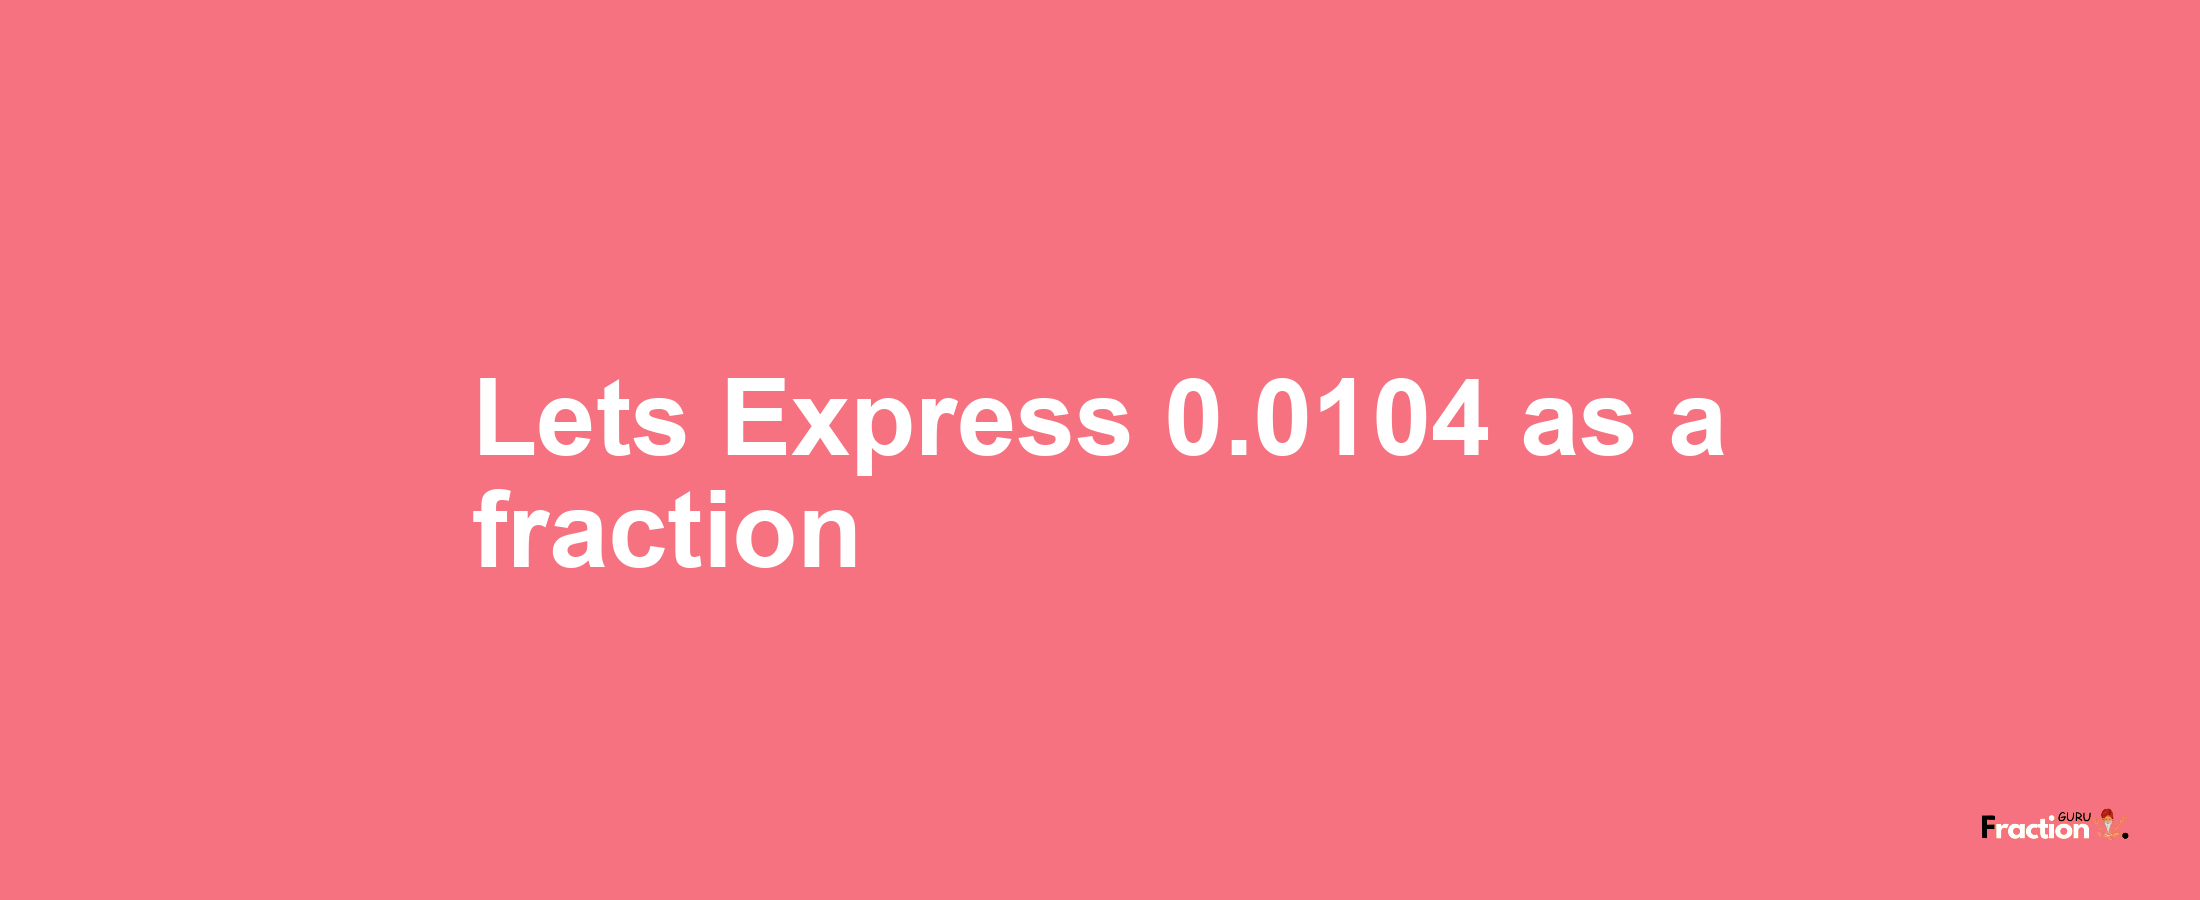 Lets Express 0.0104 as afraction